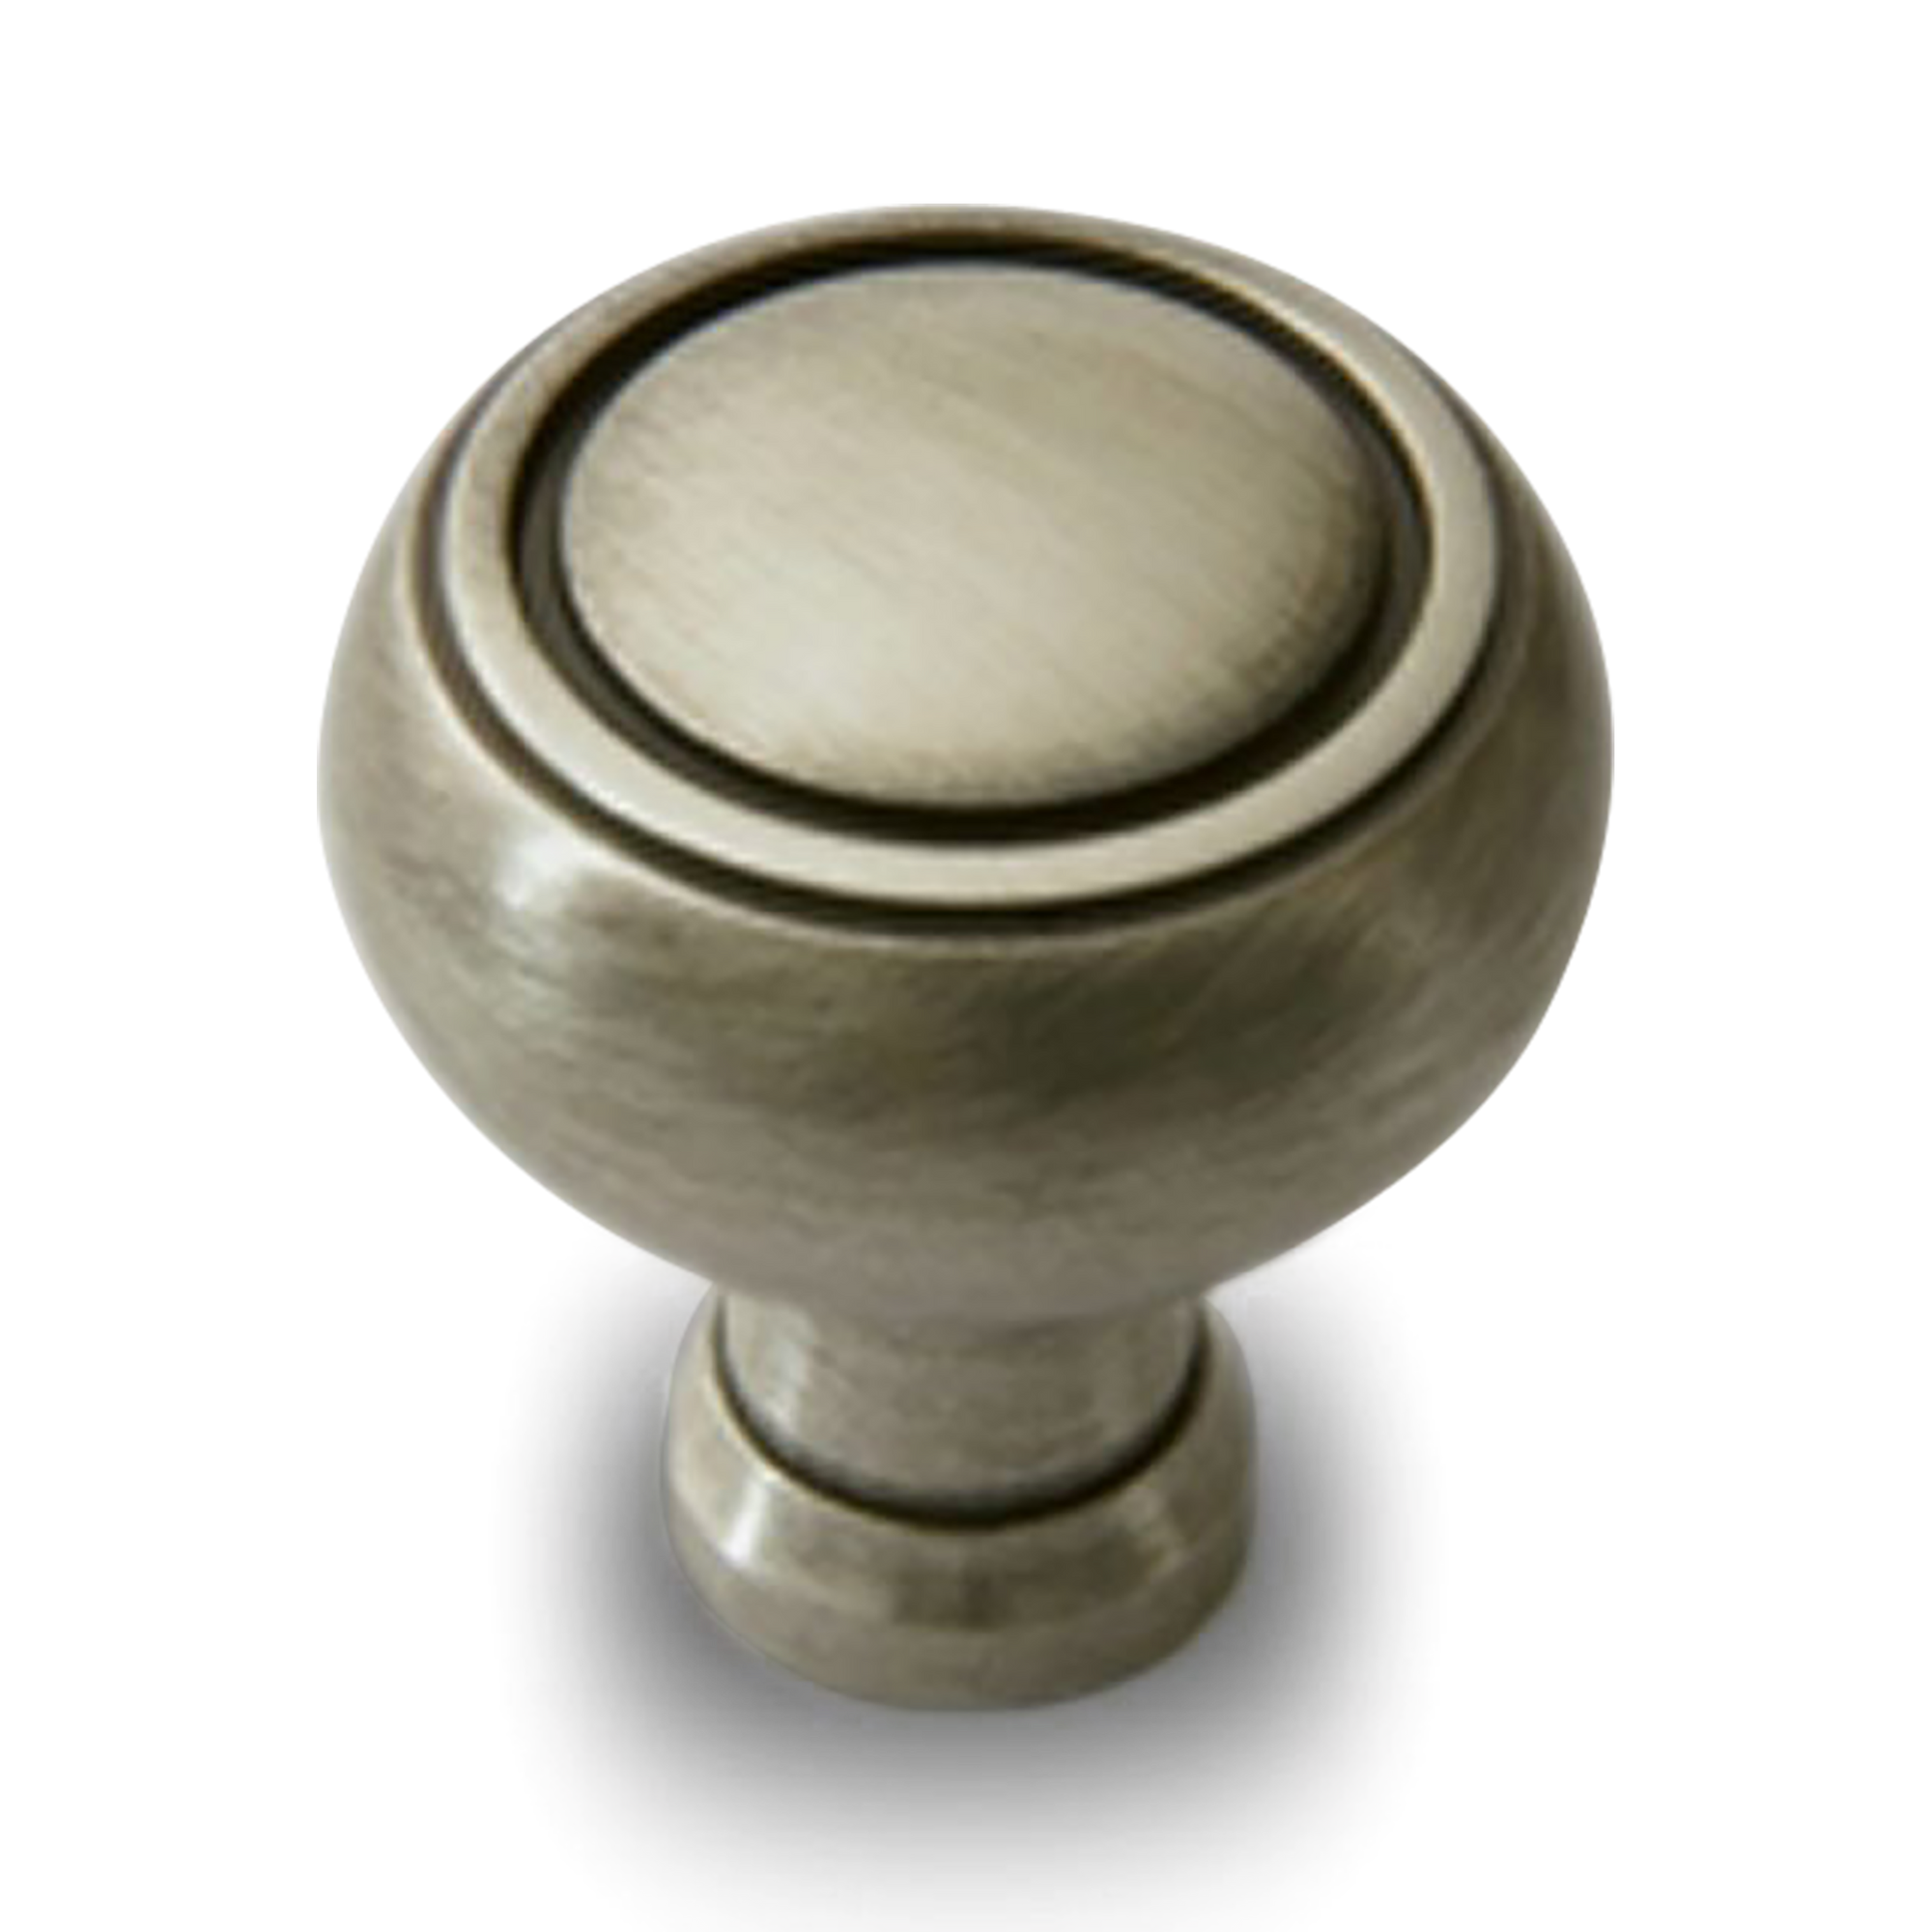 A traditional round knob with engraved ring details.